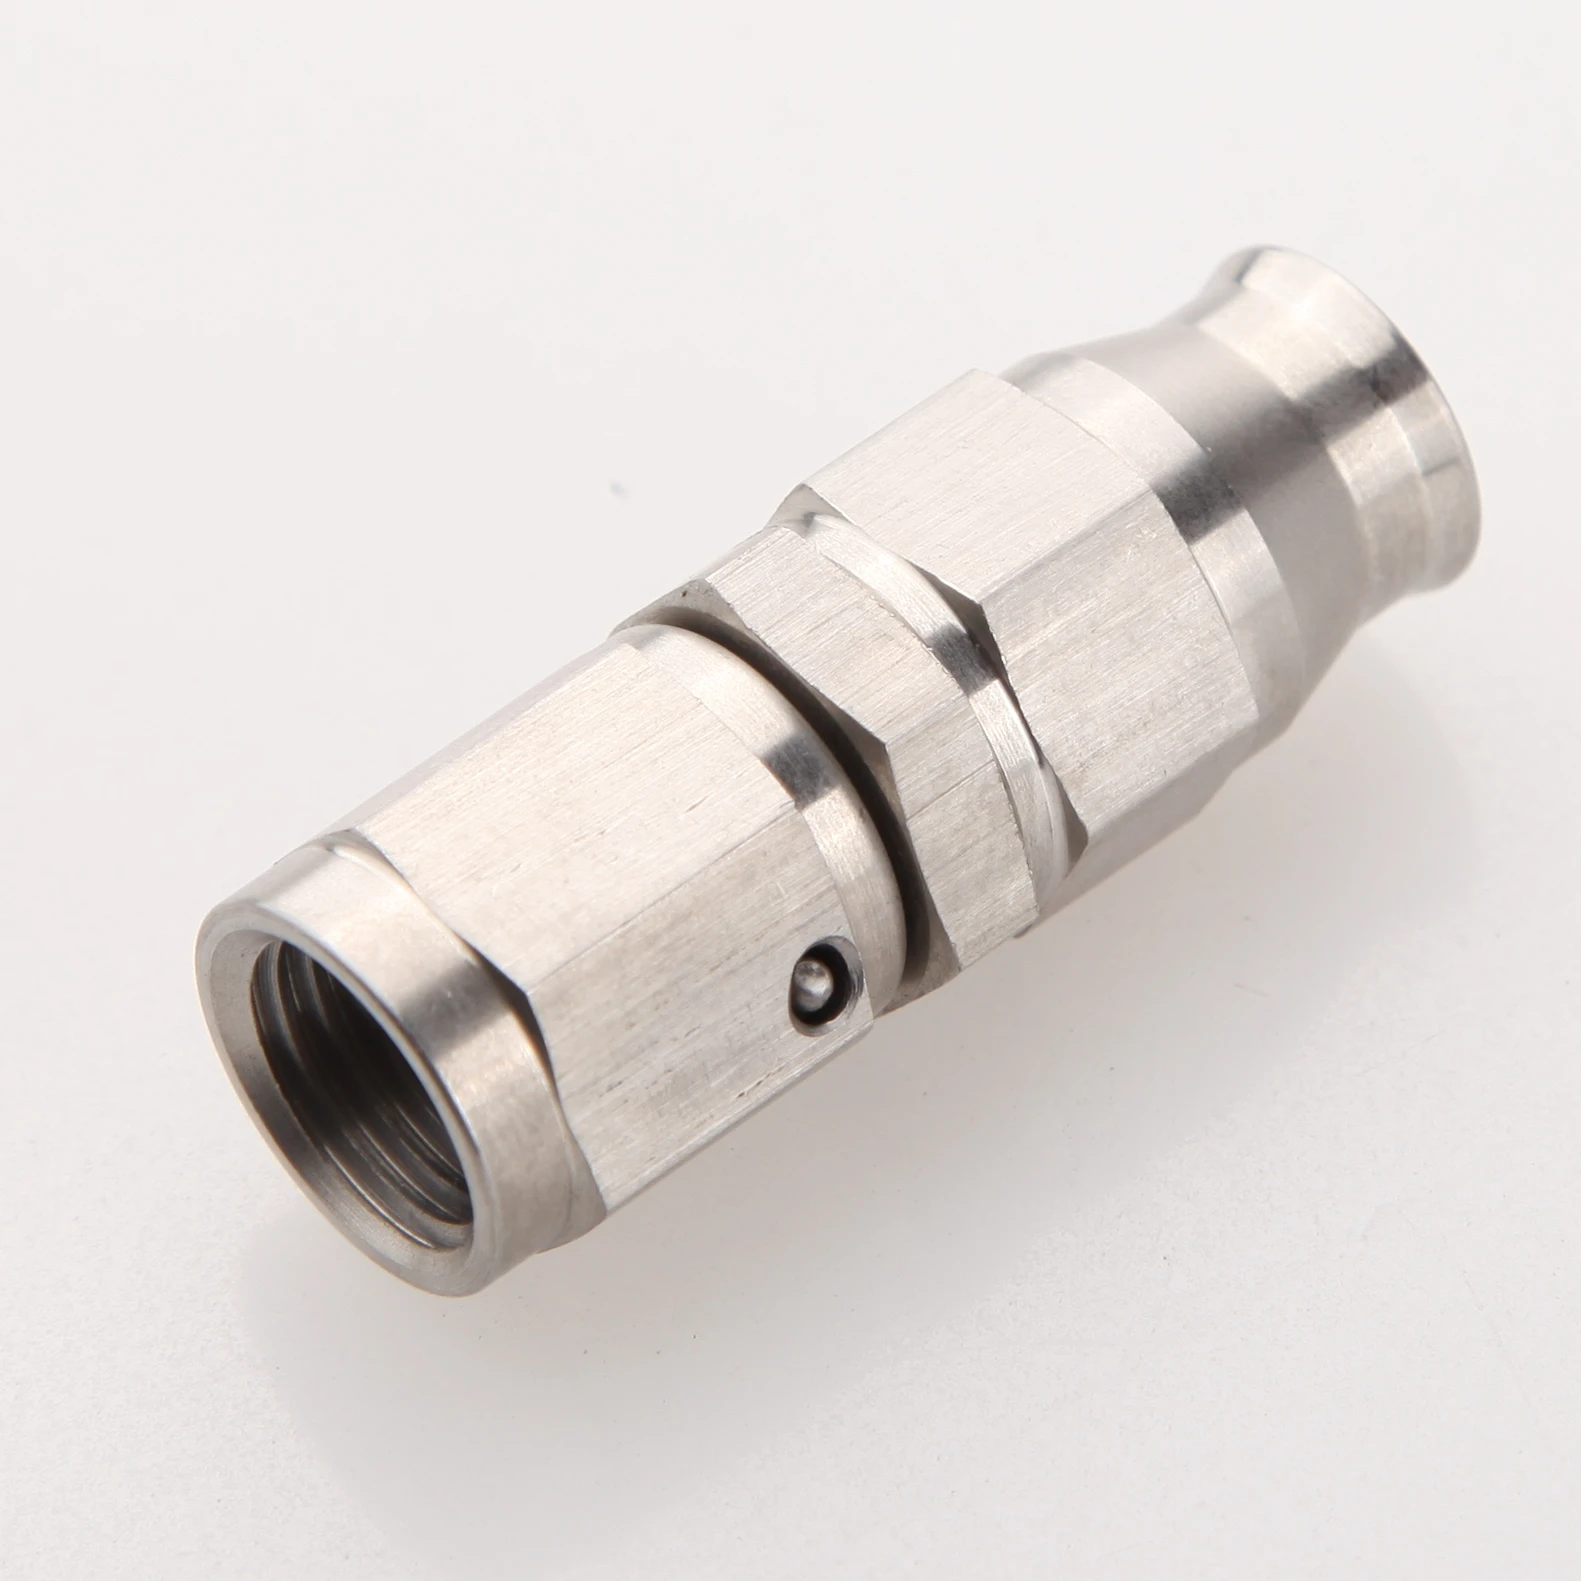 Thread AN4 Straight Female Stainless Steel 3AN Hose End Brake Fitting